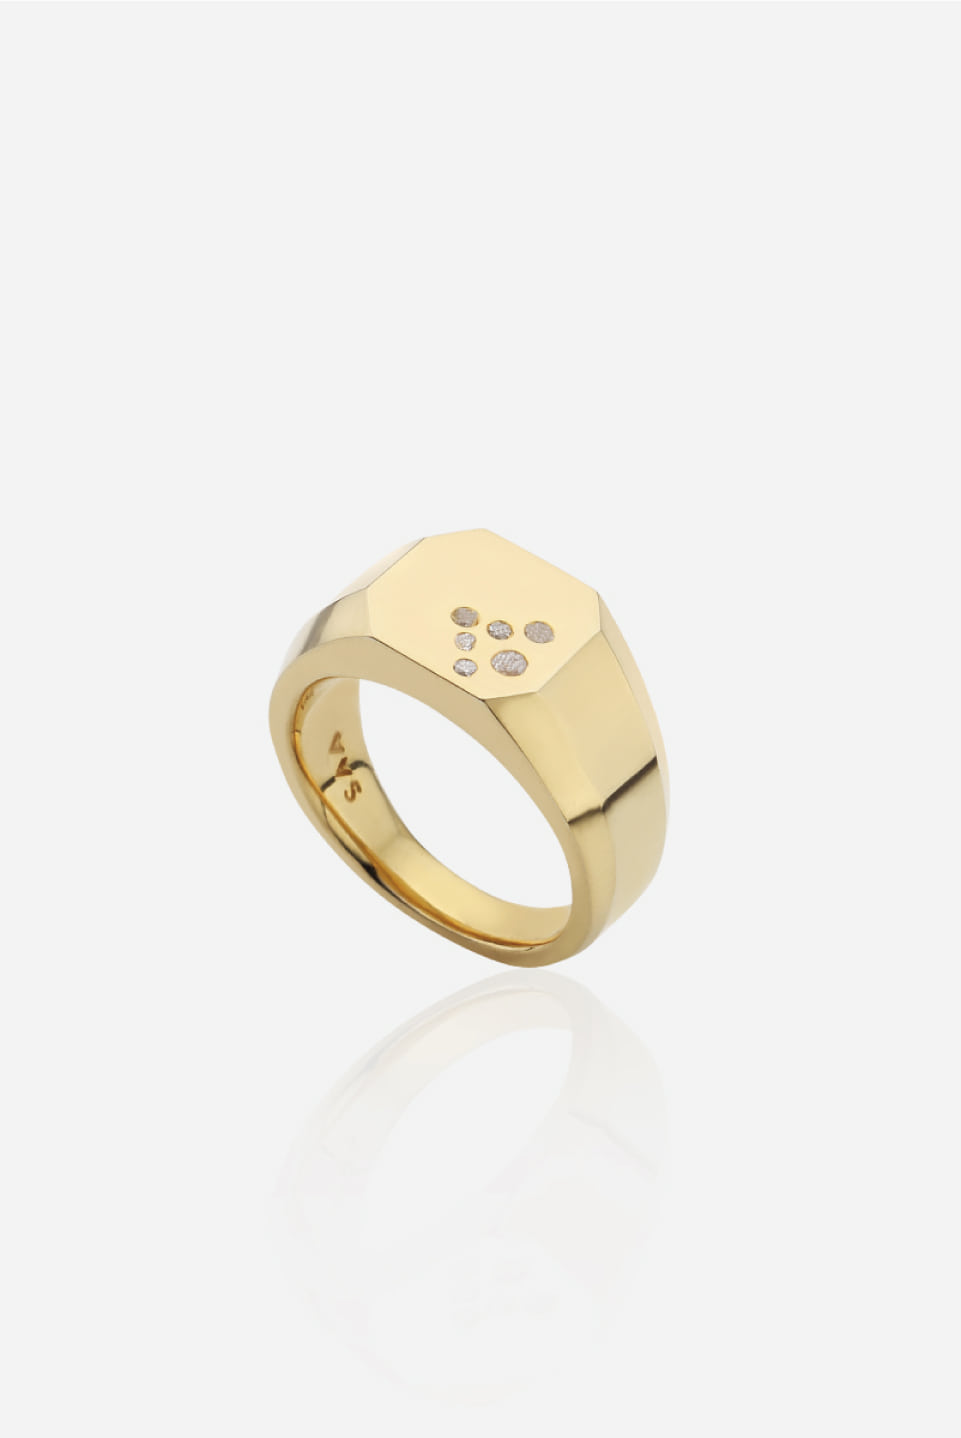 Astro Signet Ring in Gold